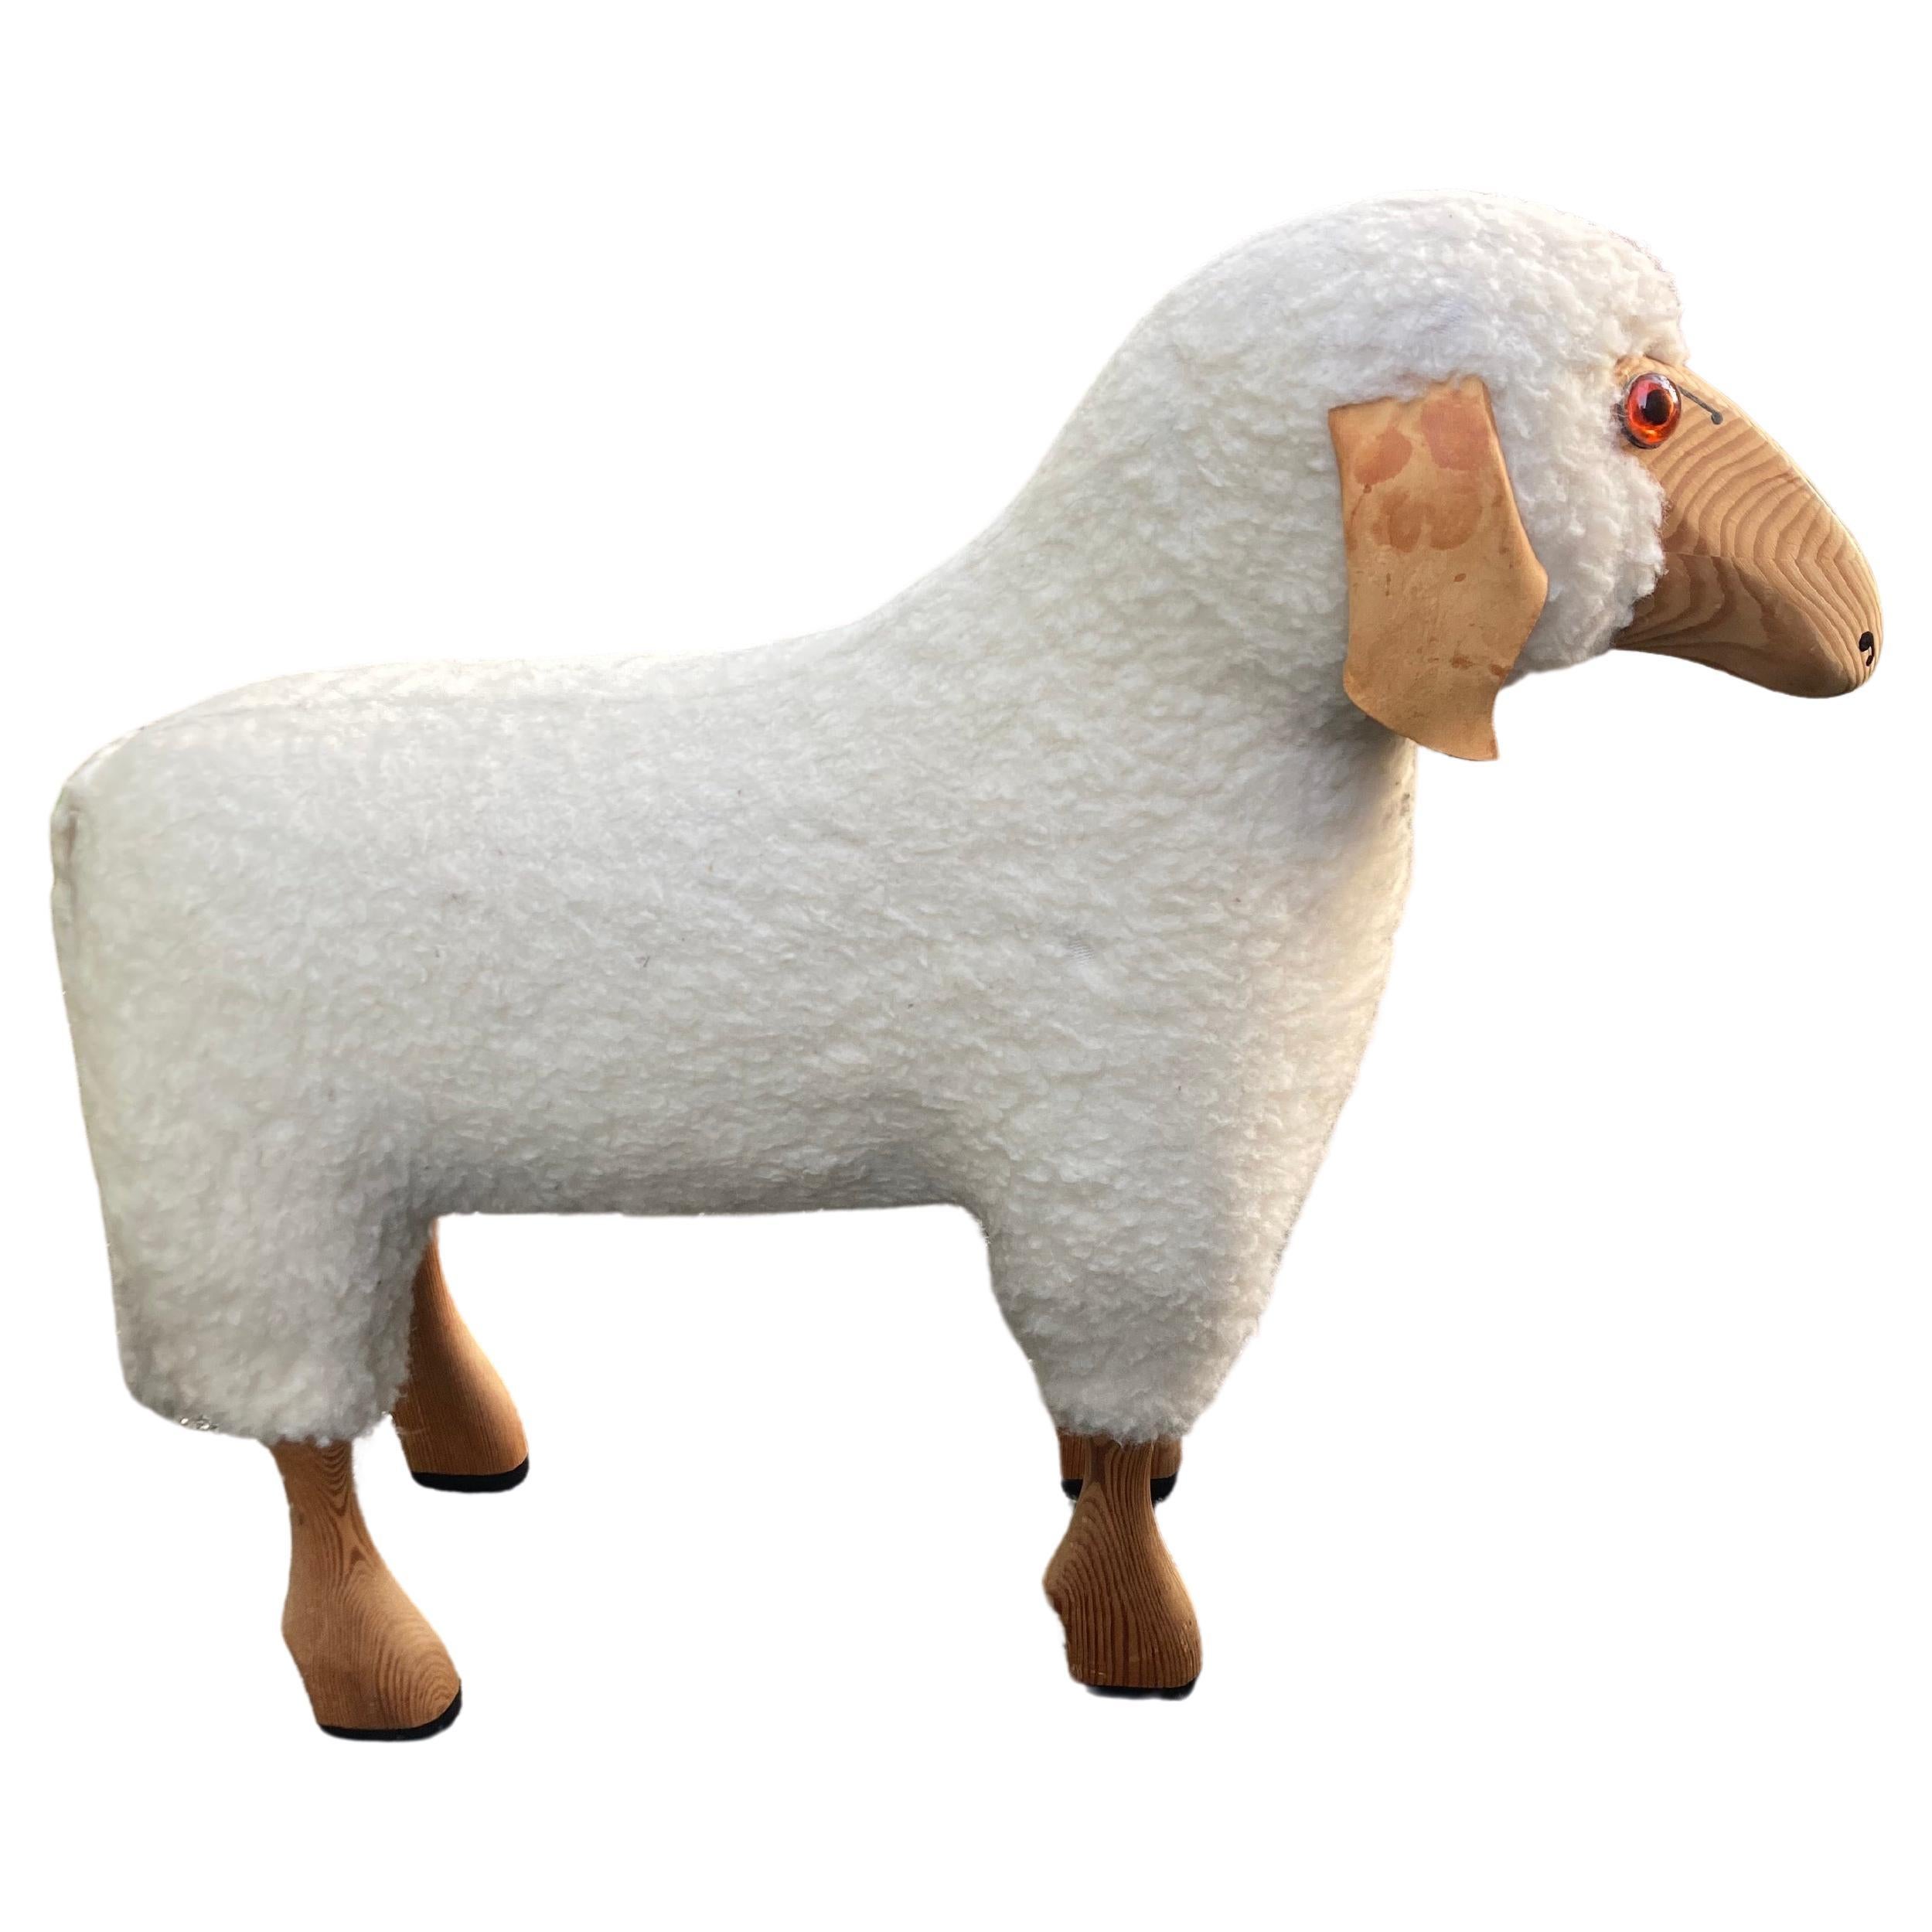 Handmade  white woolly  sheep by Hans -Peter Krafft. 1970s. Made in Germany.